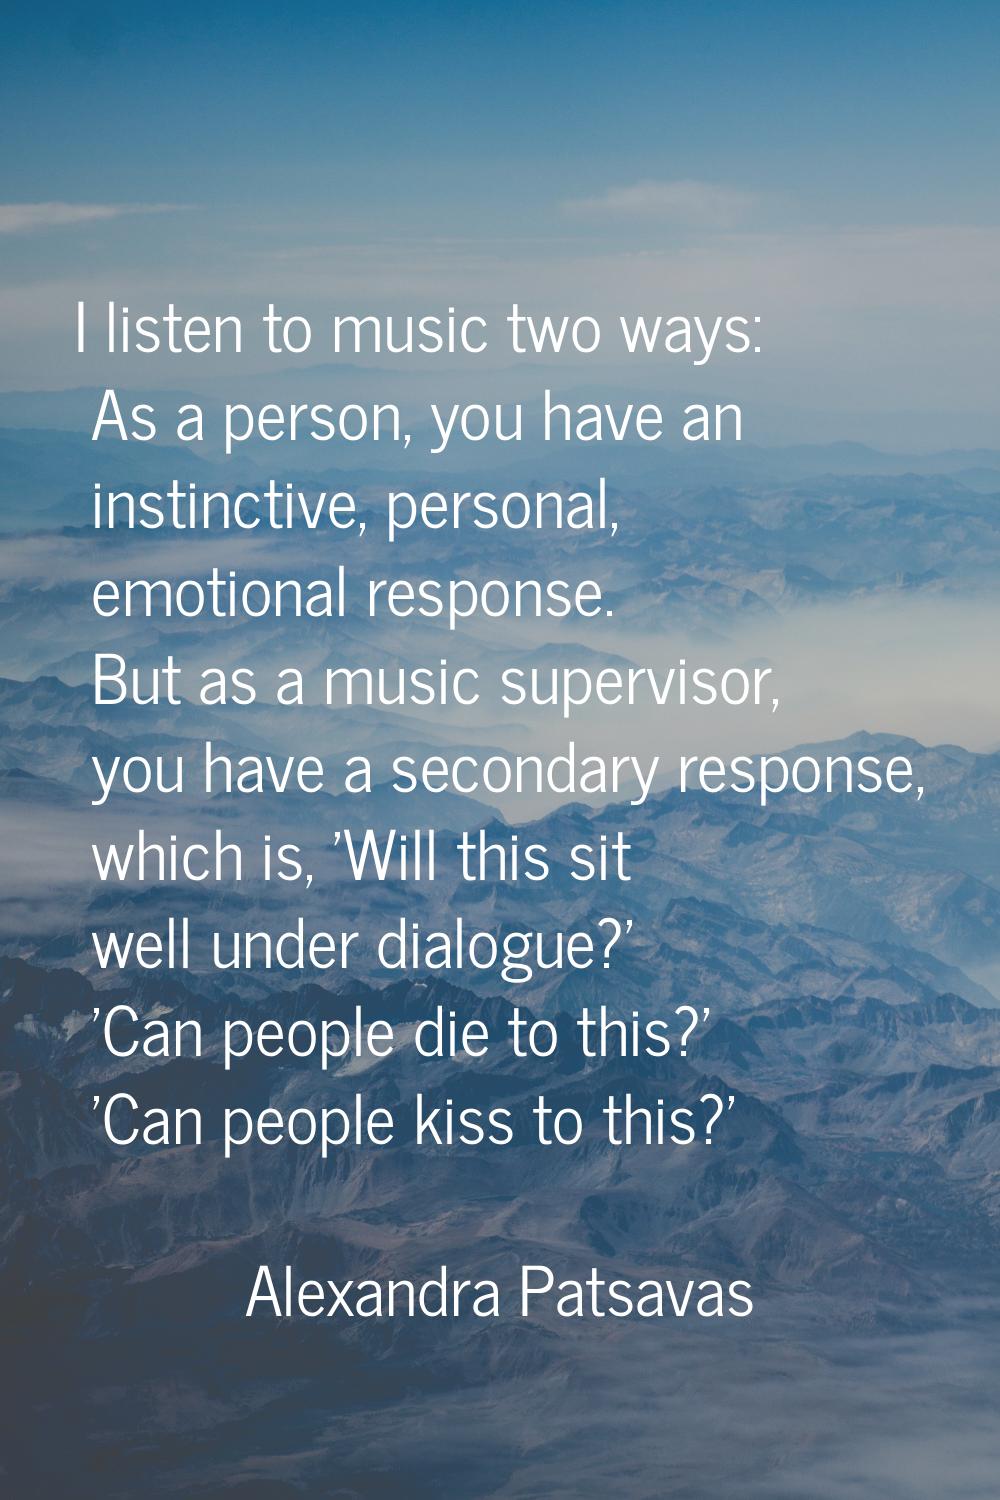 I listen to music two ways: As a person, you have an instinctive, personal, emotional response. But